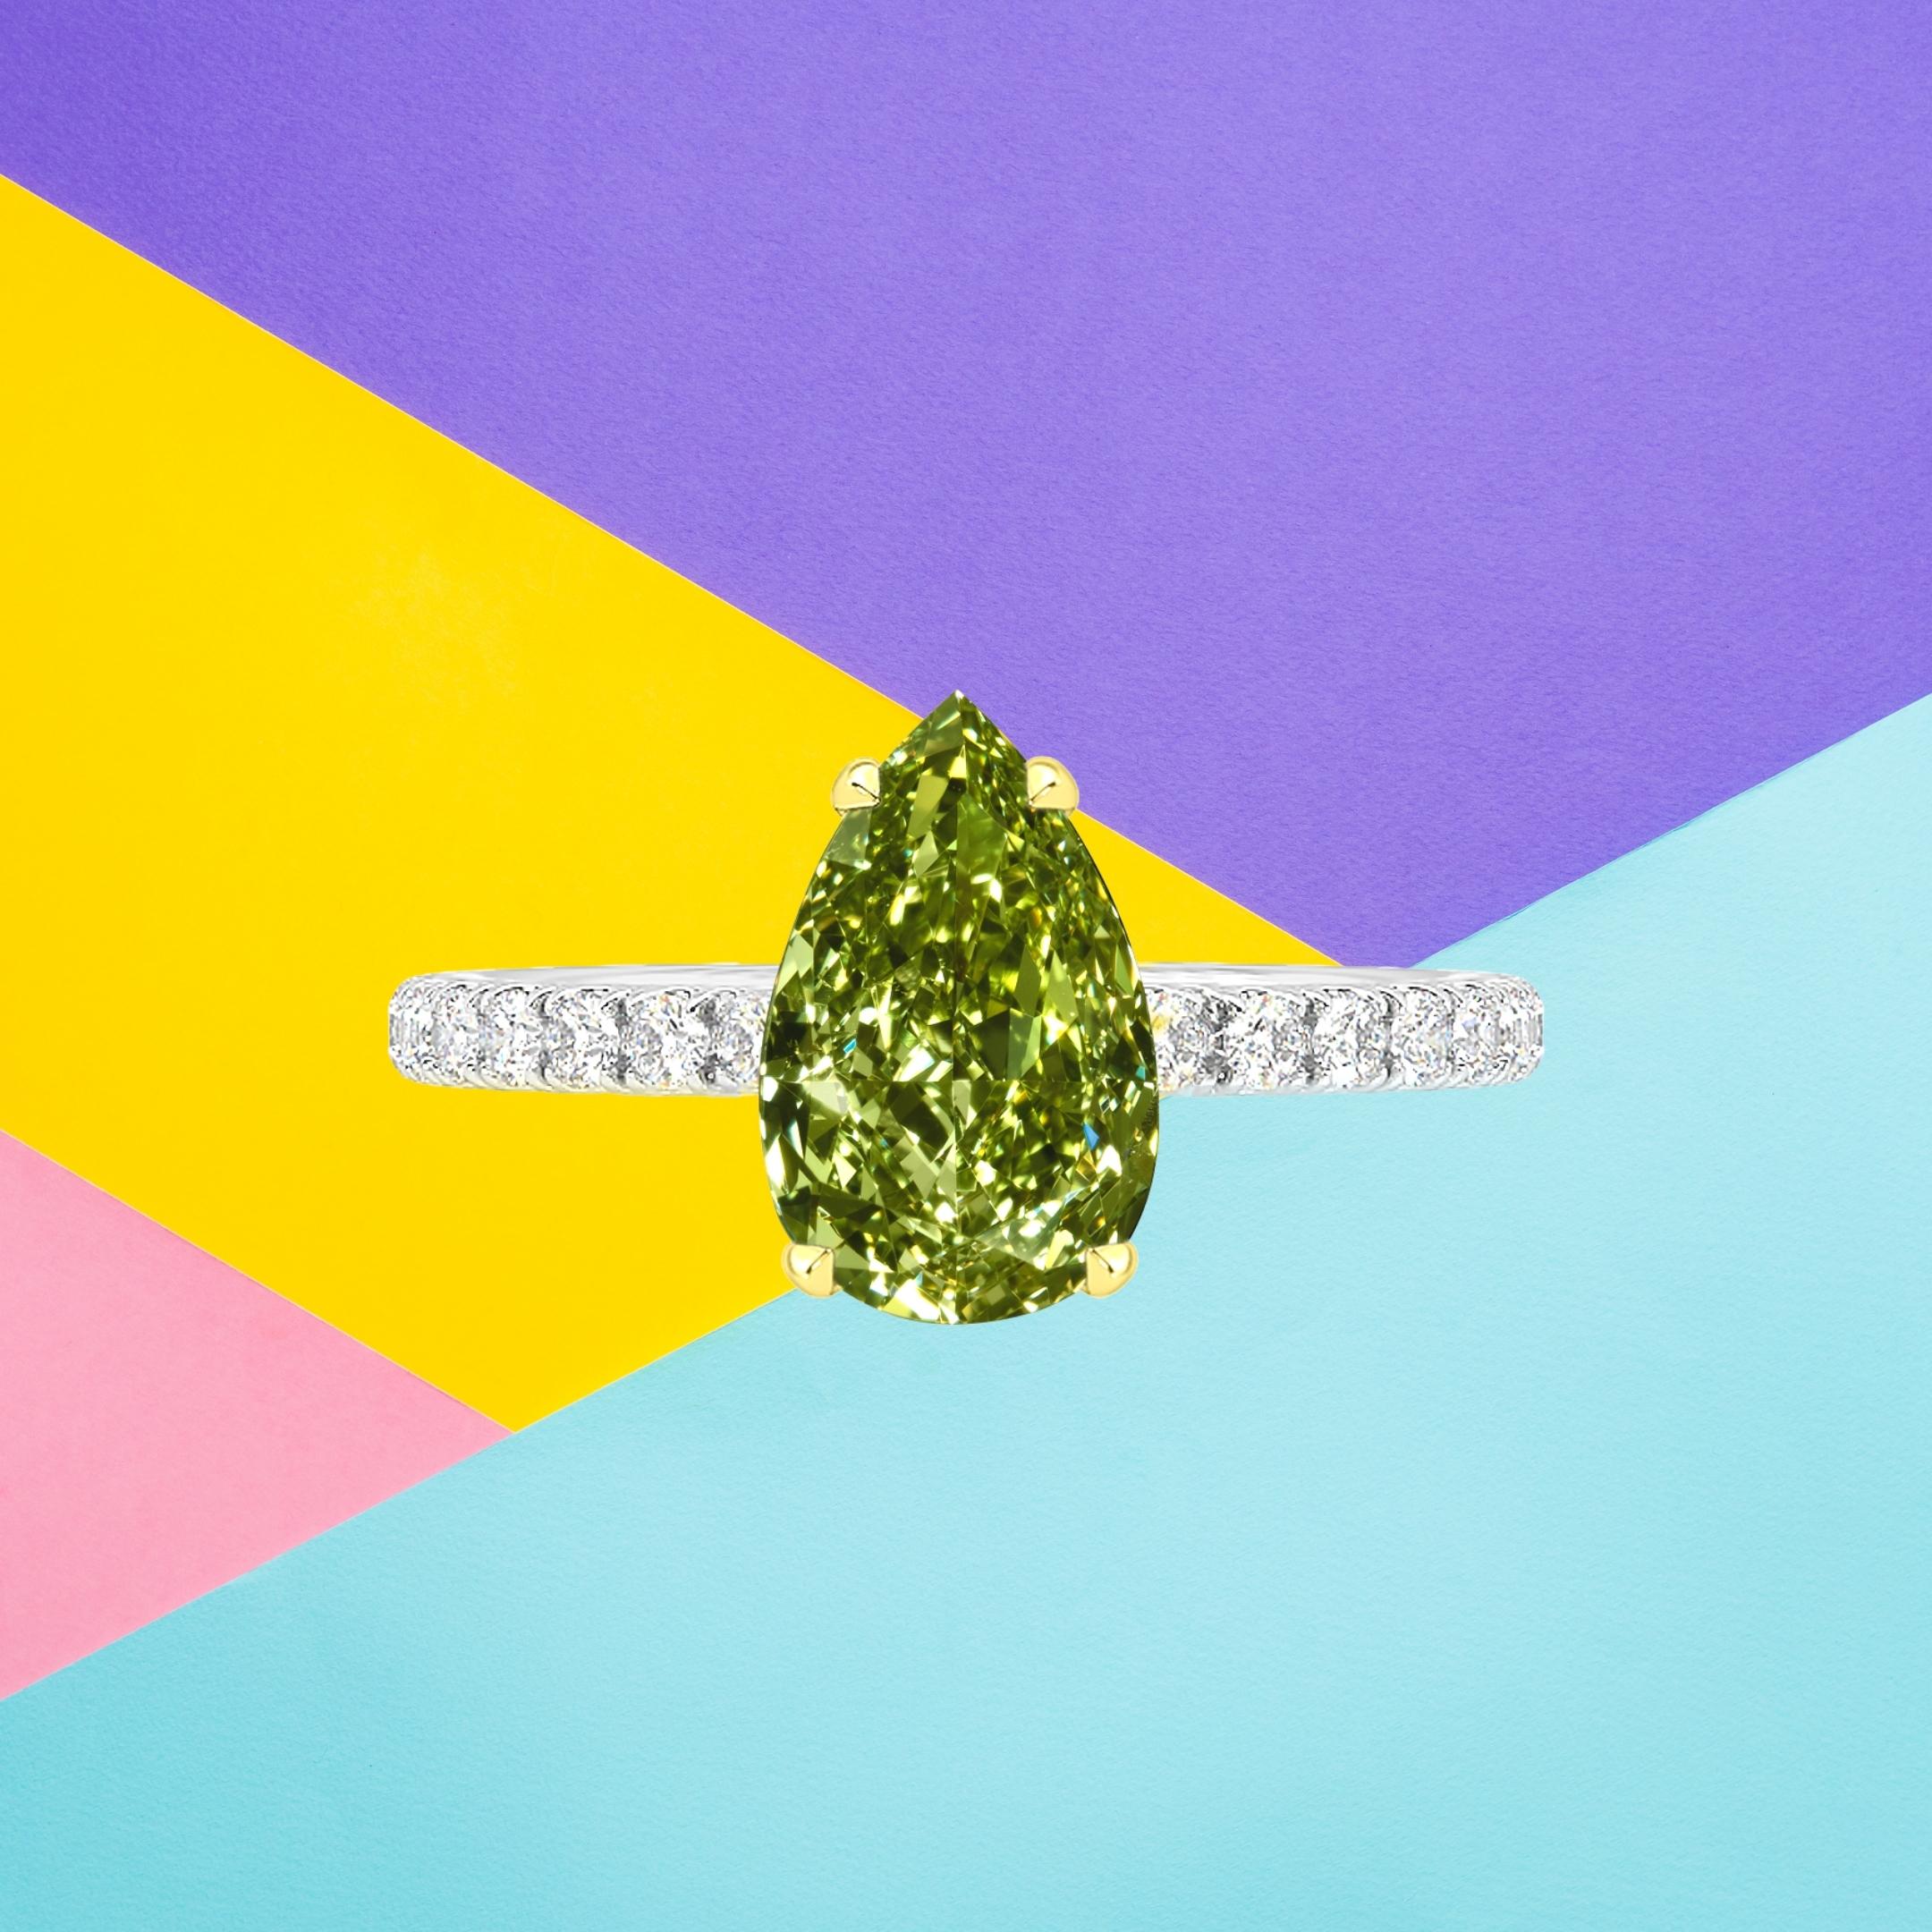 This pear shape diamond weighs 1.76 carat and is certified 'Fancy Deep Grayish Yellowish Green' color by the Gemological Institute of America. The GIA has also assigned a VS1 clarity grading to the stone. The diamond has been inscribed with the